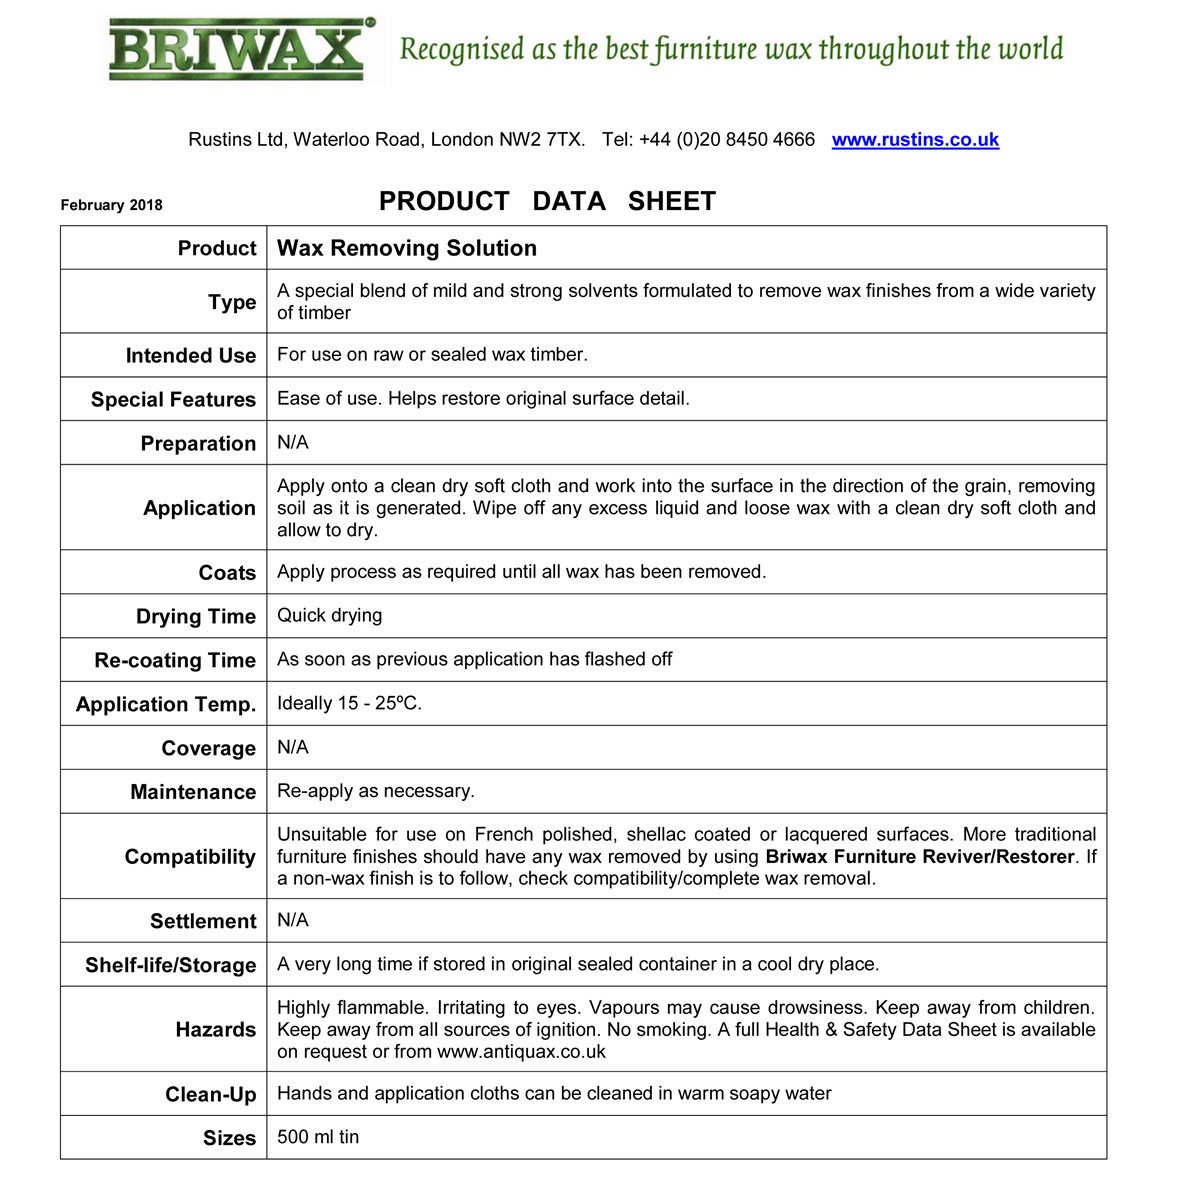 Briwax Wax Removing Solution Product Data Sheet.